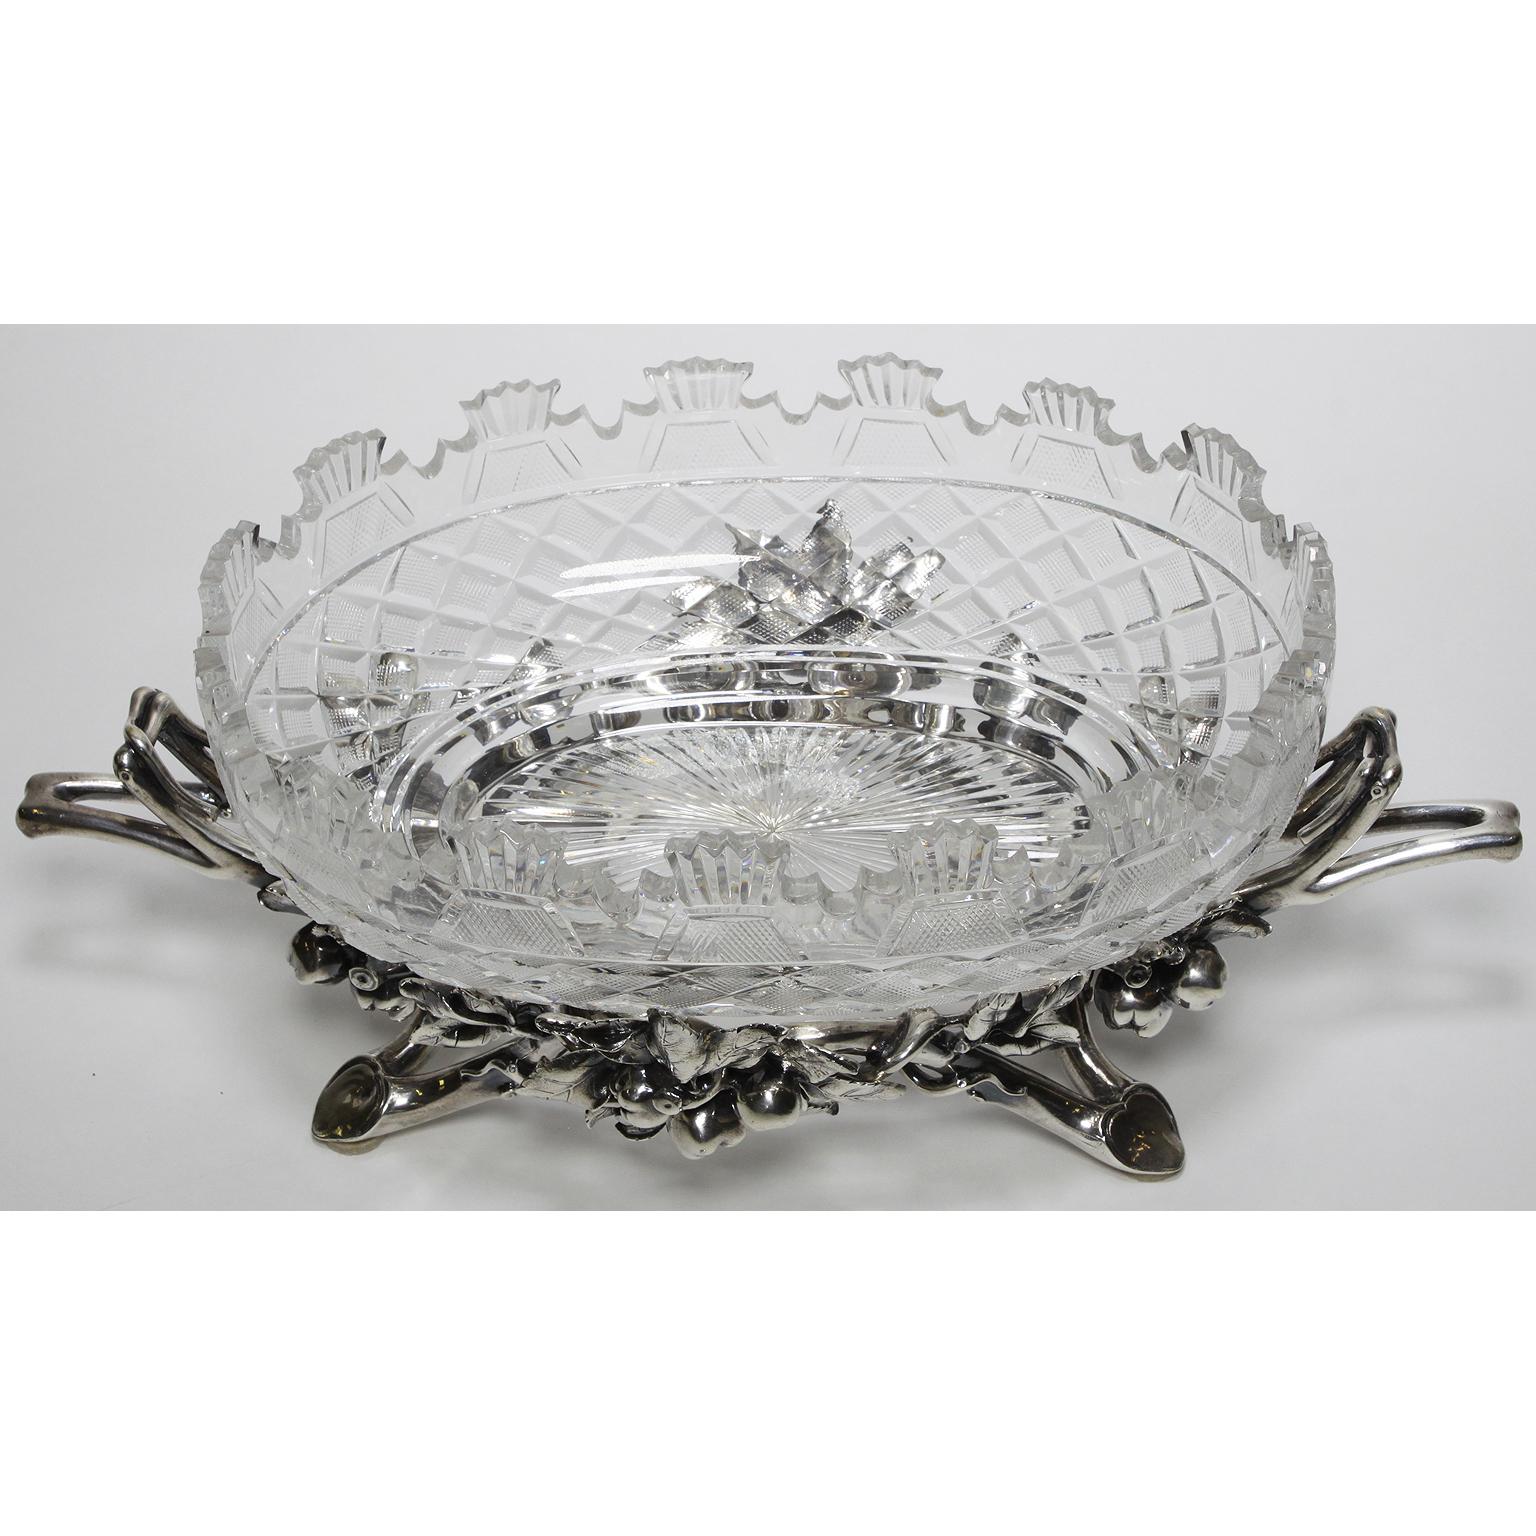 A fine French 19th-20th century Louis XV style silvered centrepiece by Christofle & Cie. with an ovoid molded cut-glass centre-dish (later) on a pomegranate branch-form foot, the underside stamped: CHRISTOFLE and 1147156, Paris, circa 1900.

Charles